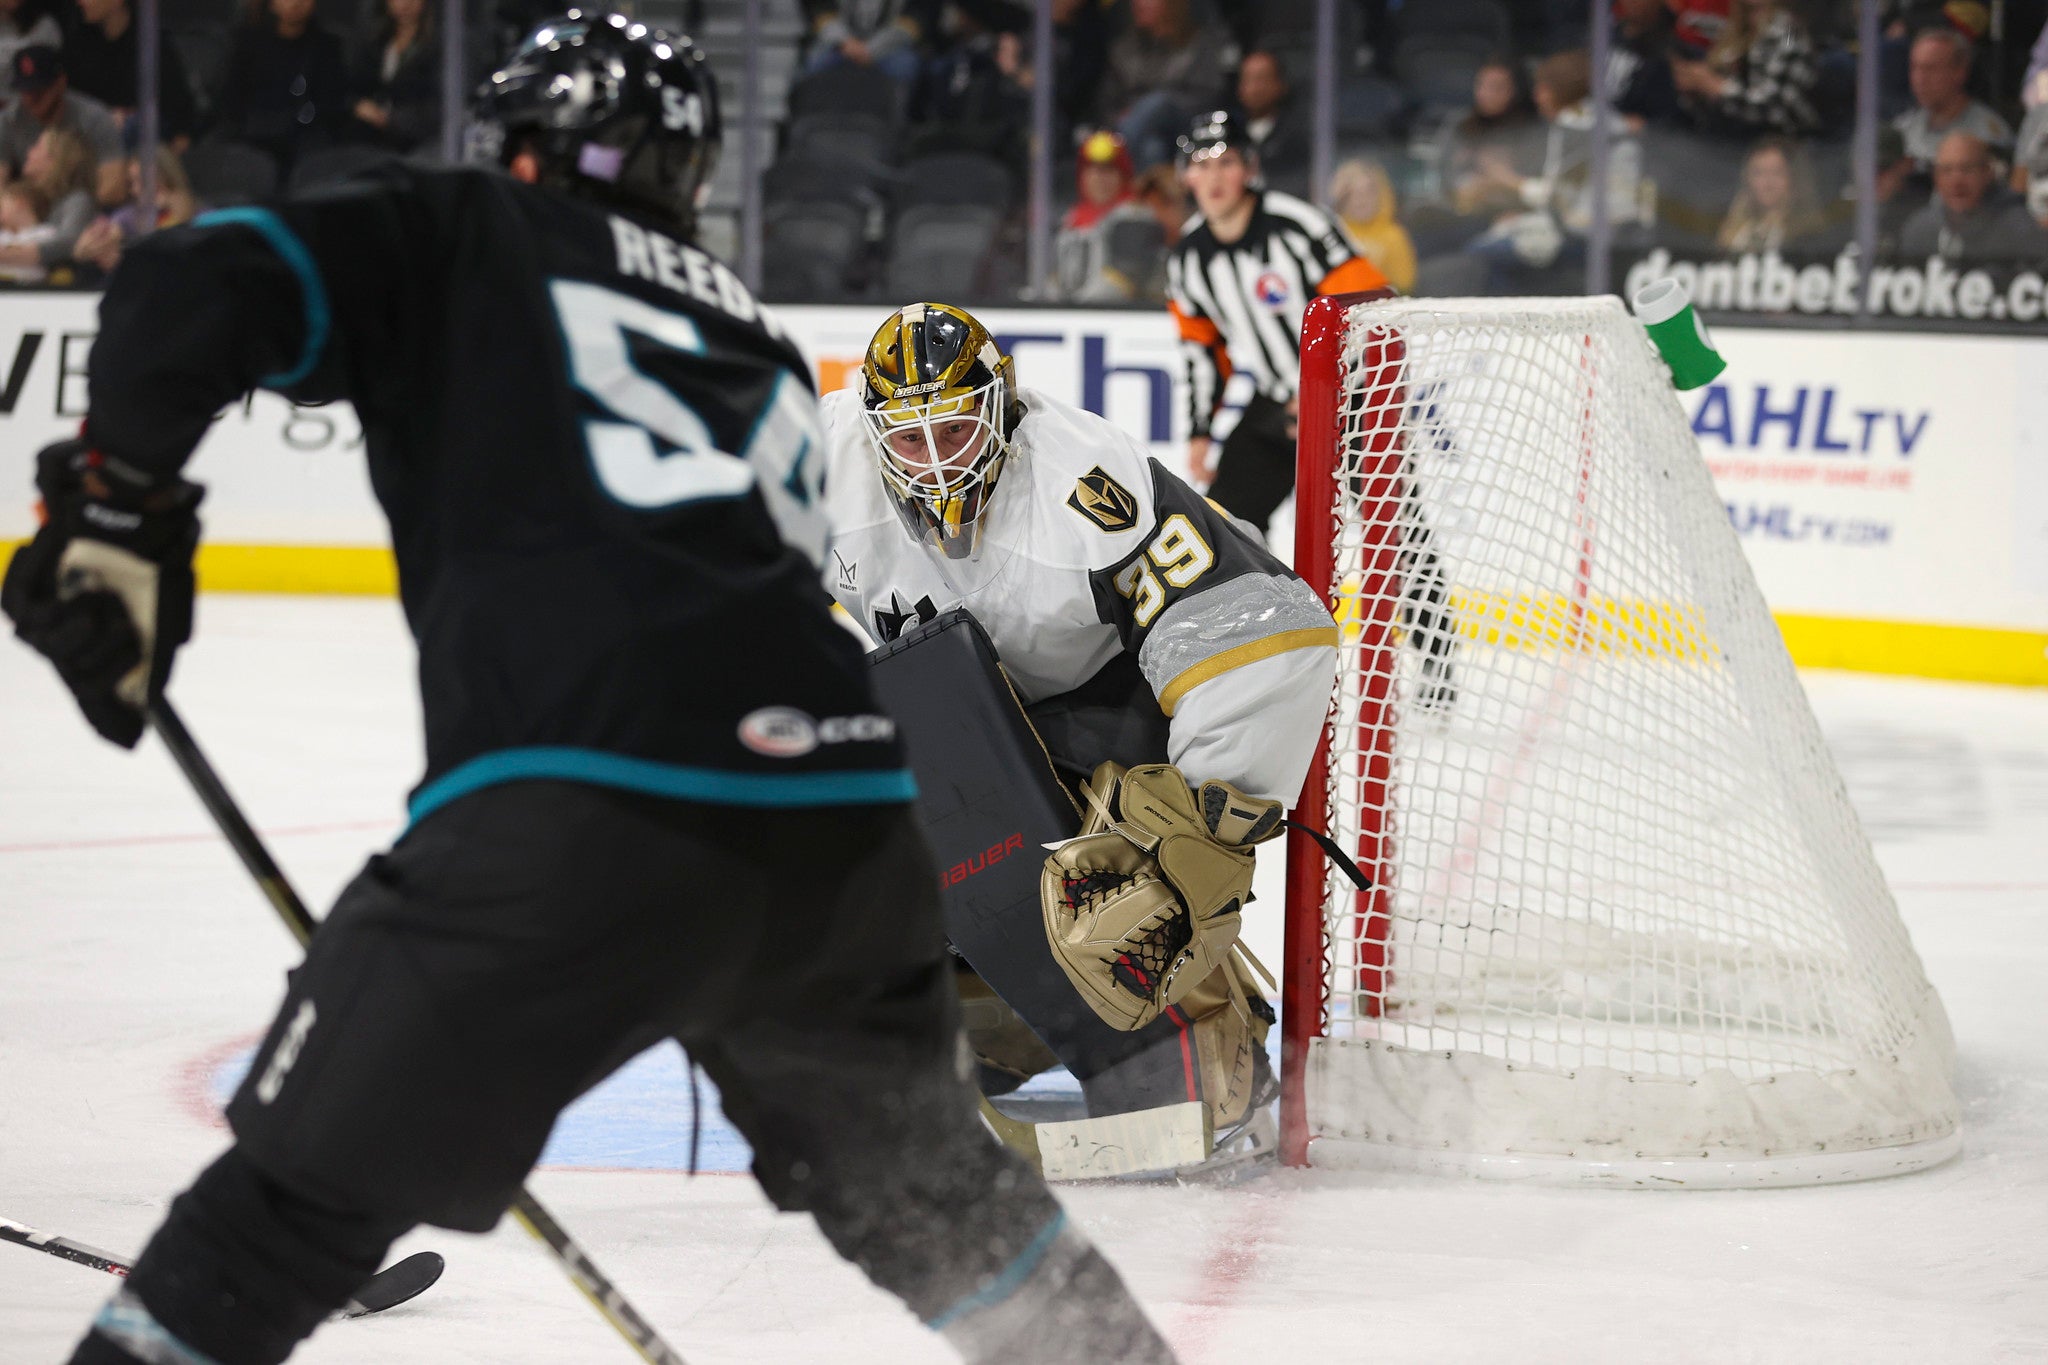 BARRACUDA BLANKED BY SILVER KNIGHTS, 5-0